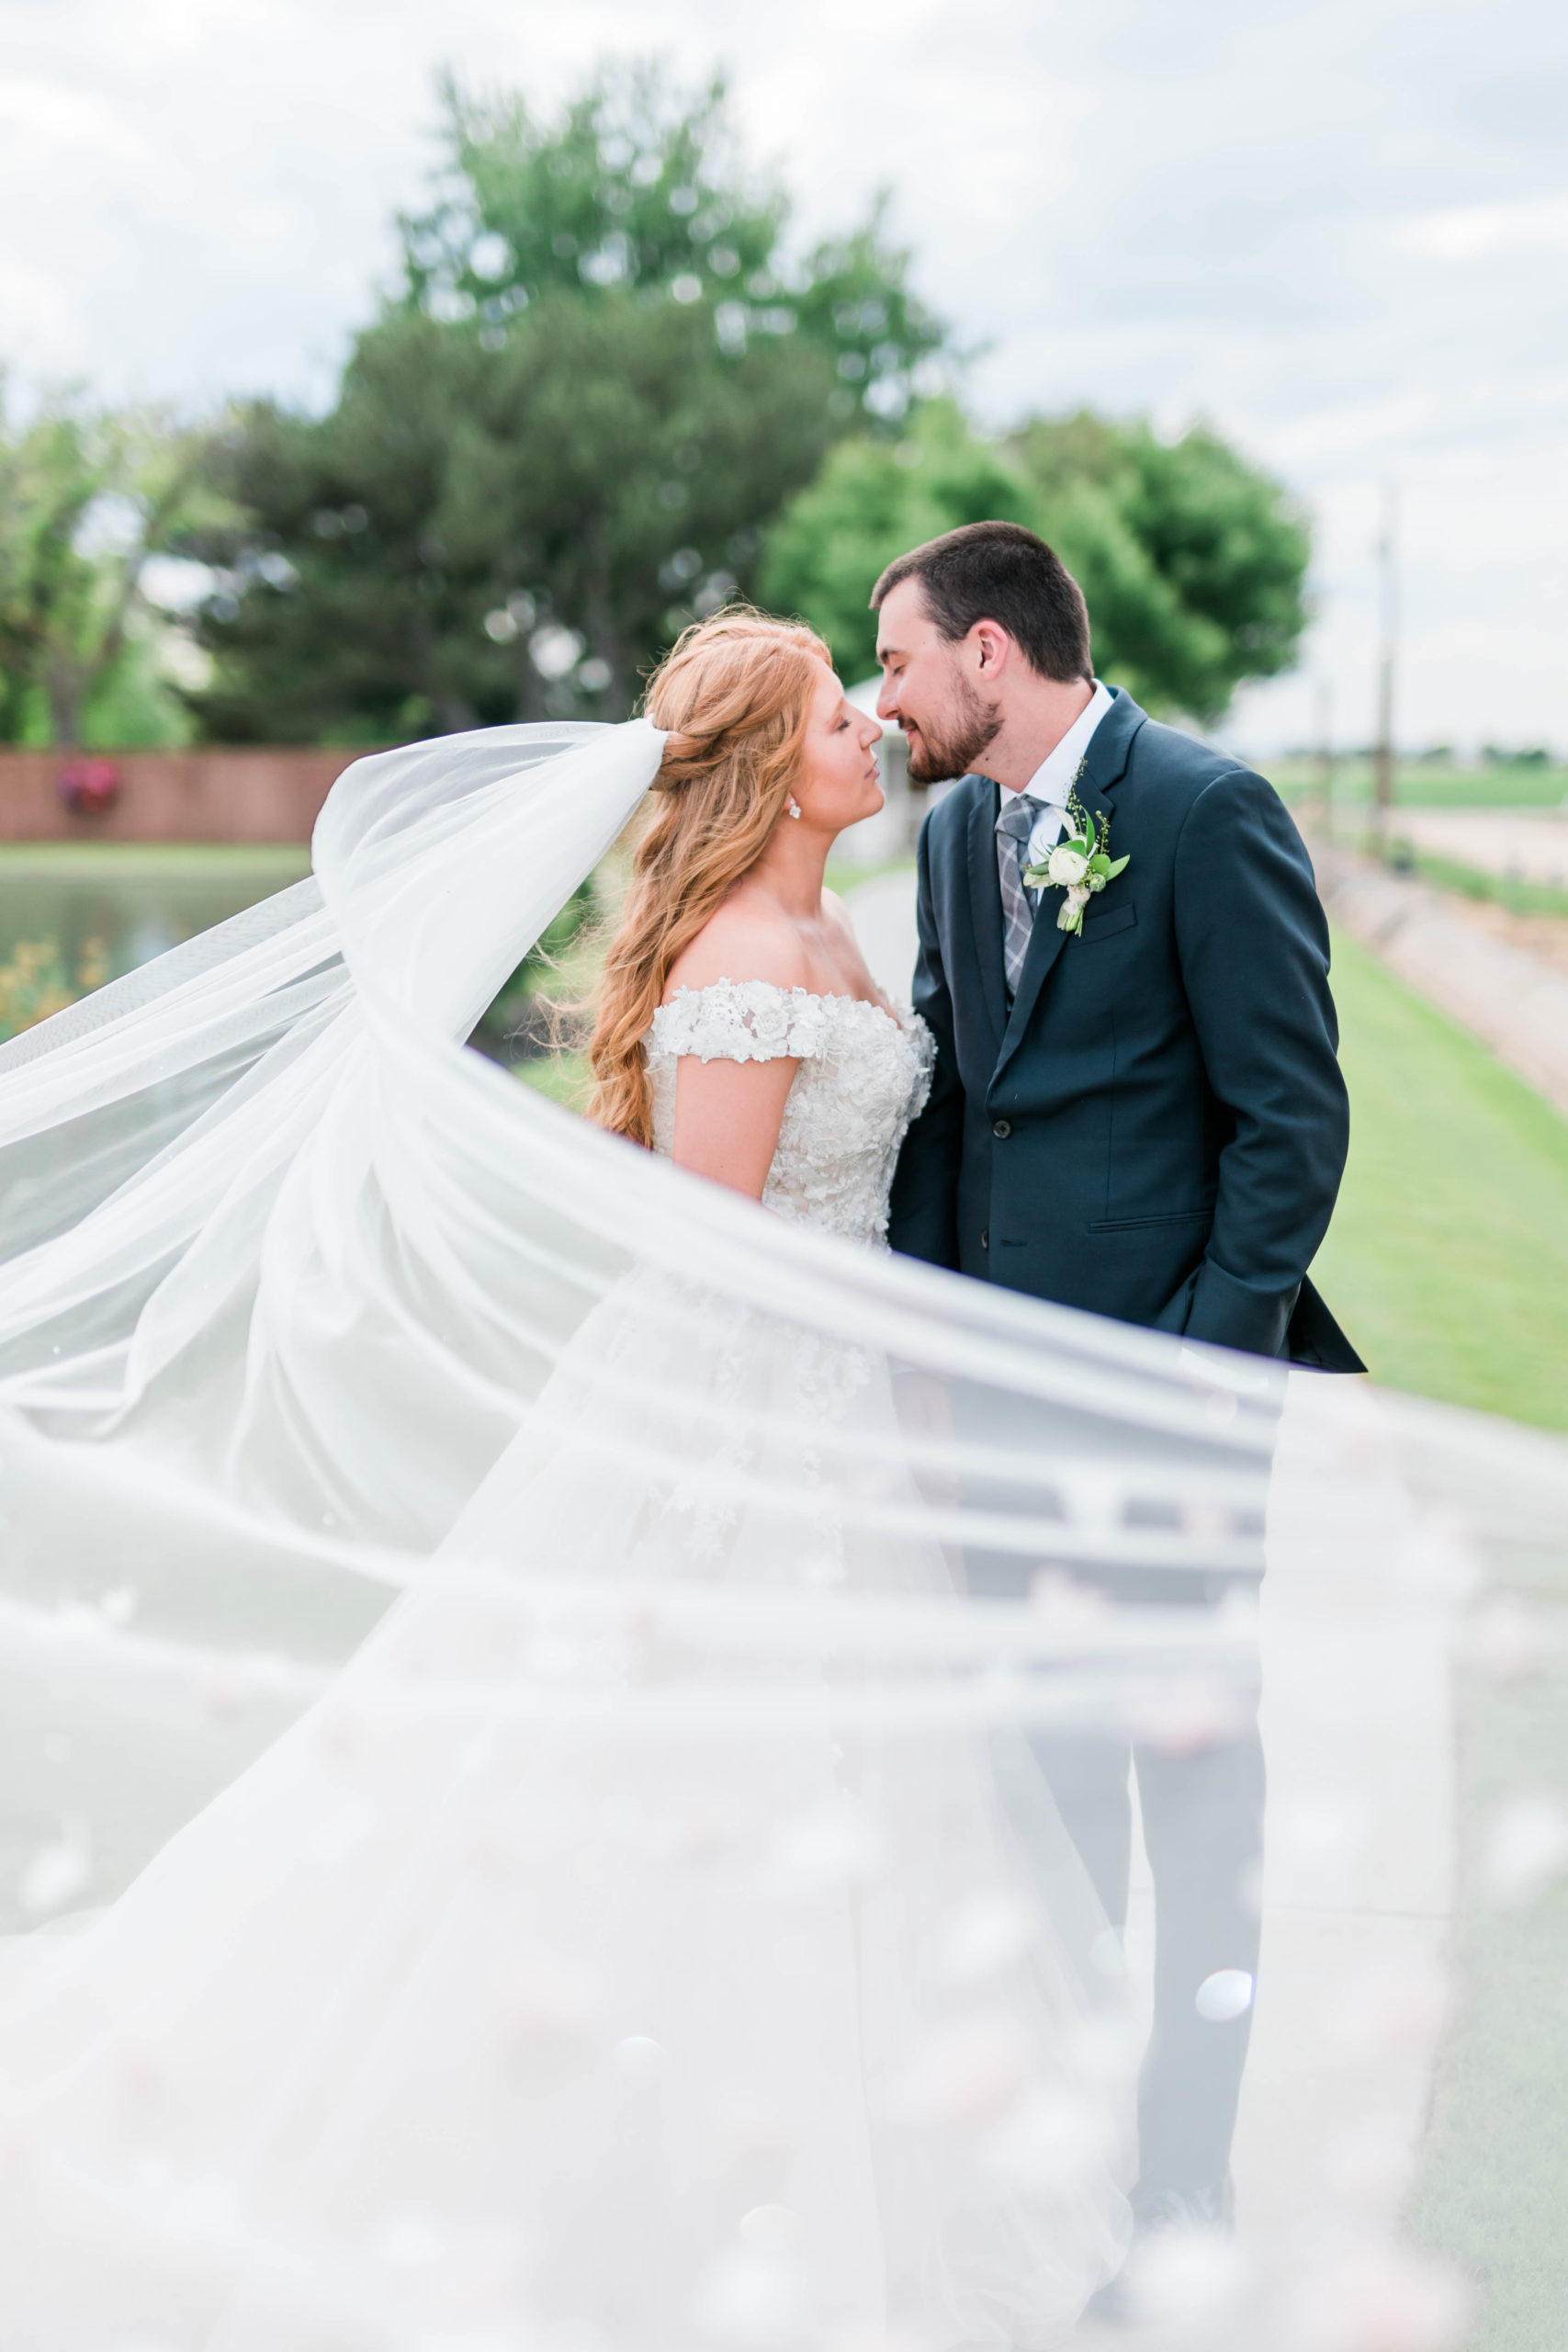 Boise bridal photos with bride and groom kissing as the brides veil blows in the wind captured by Boise Wedding Photographer